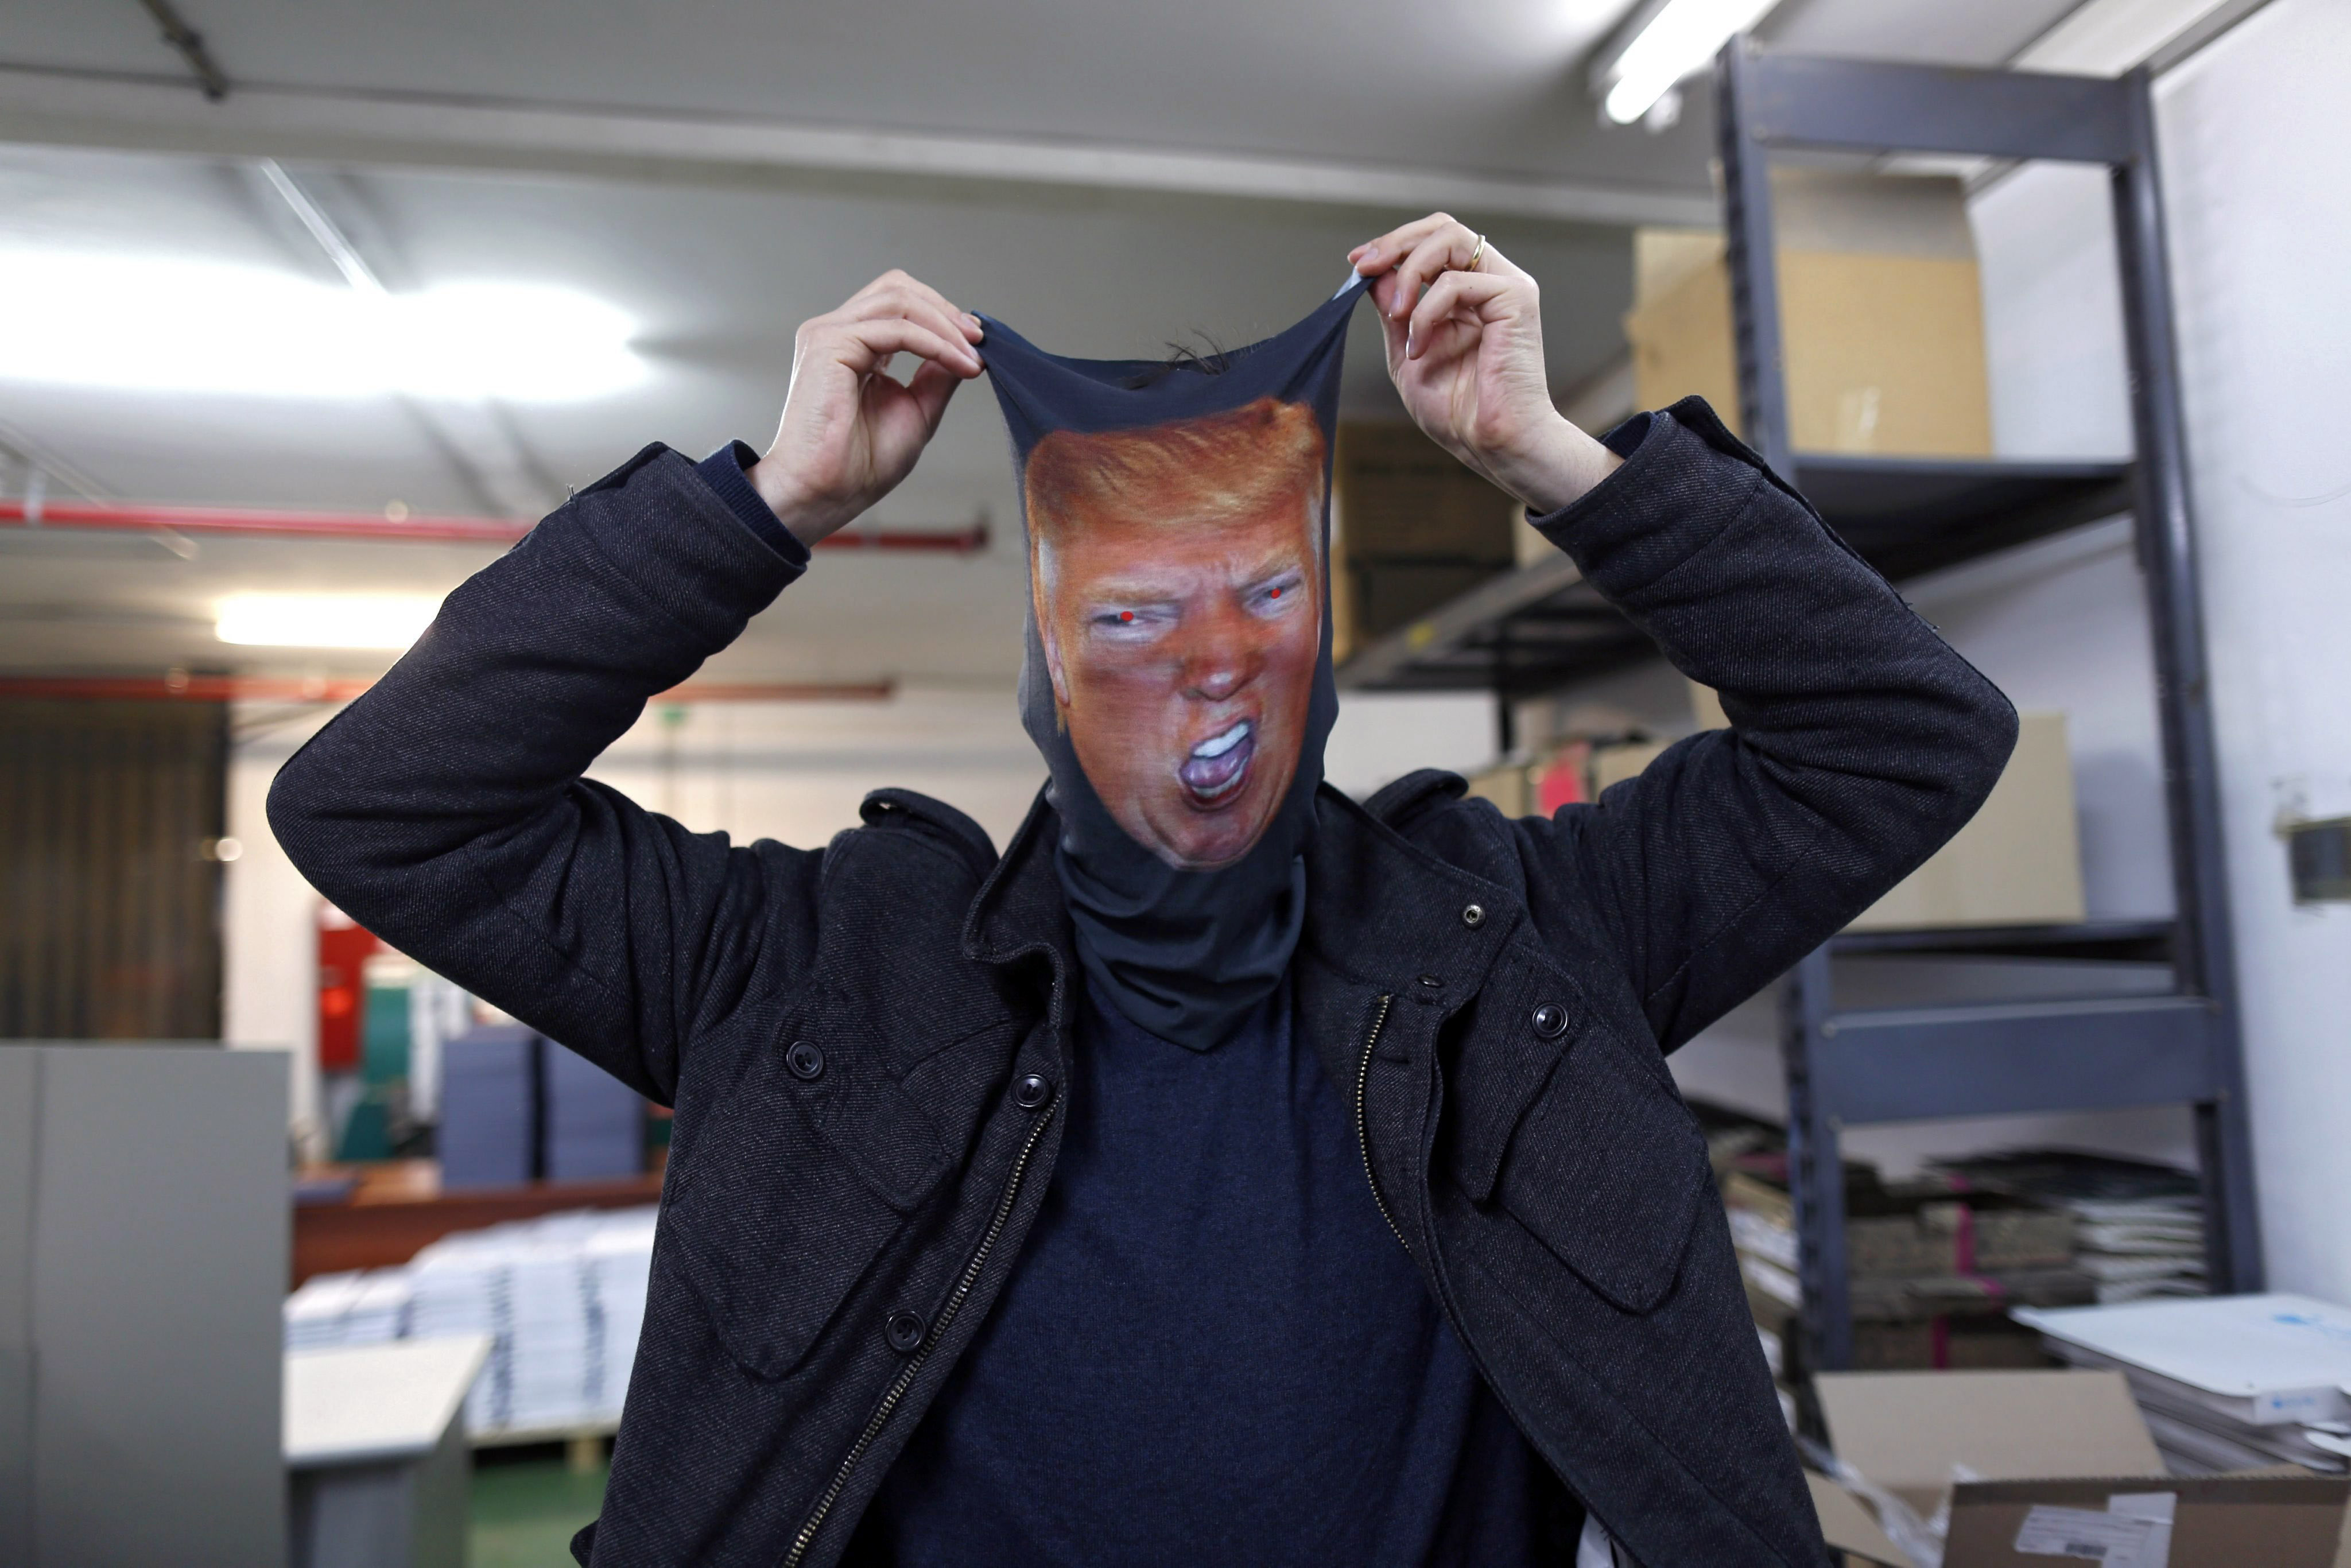 Dror Mangel poses with a printed mask showing the likeness of Donald Trump in his shop in Tel Aviv on March 17, 2016.